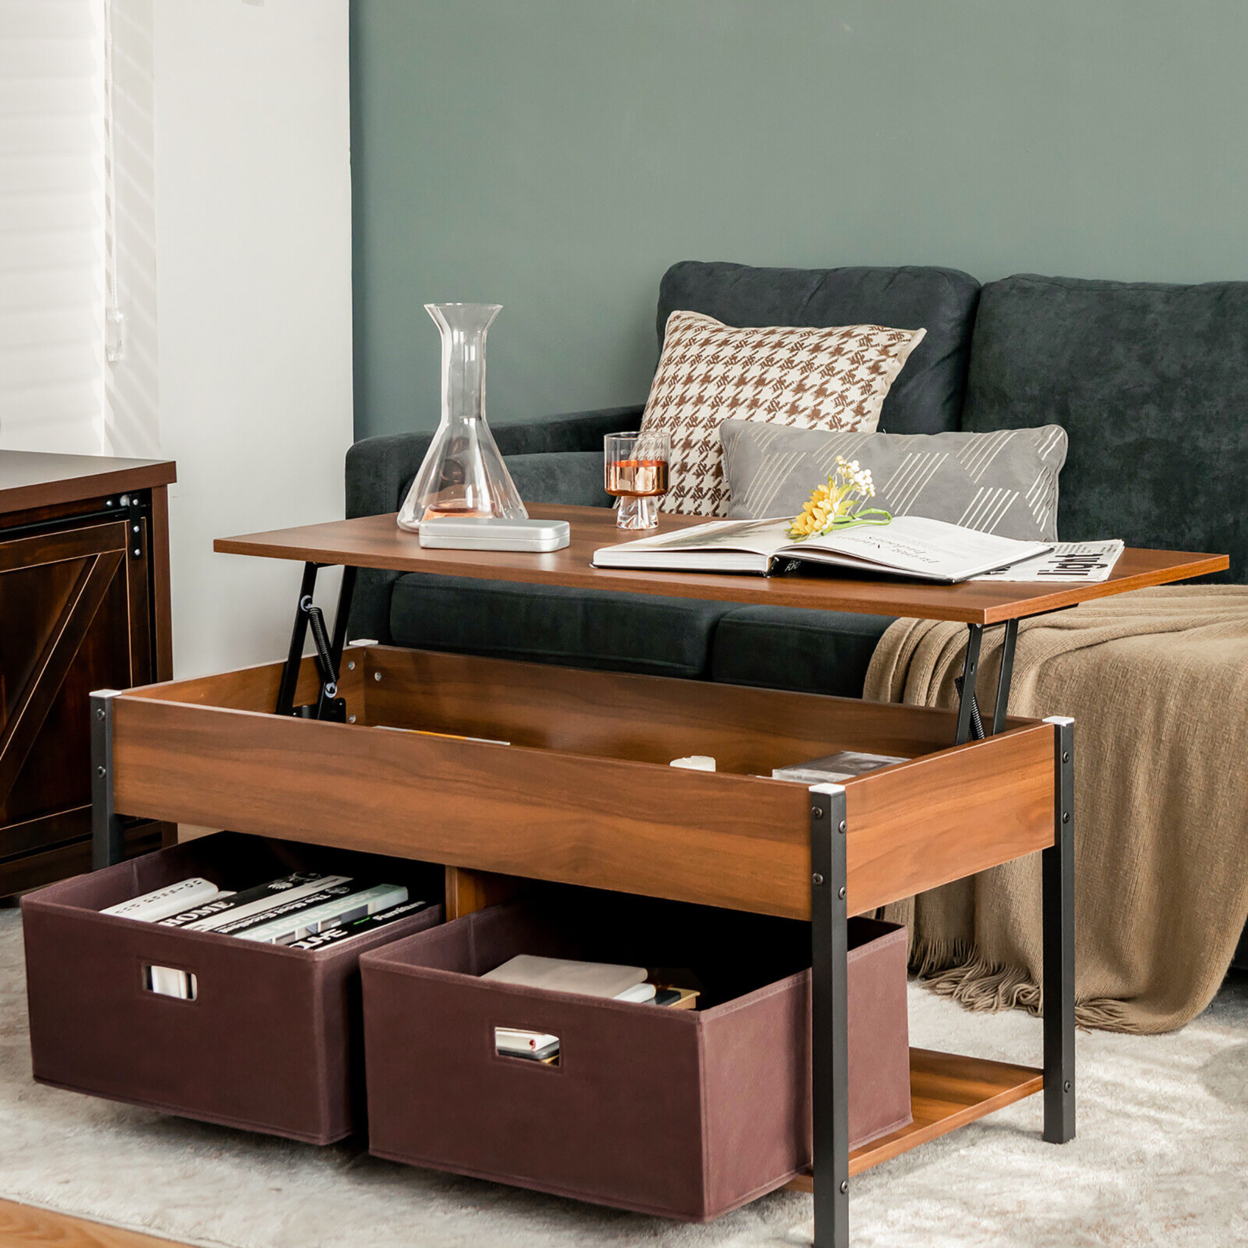 Lift Top Coffee Table Multifunctional Pop-up Central Table With Lifting Tabletop - Brown